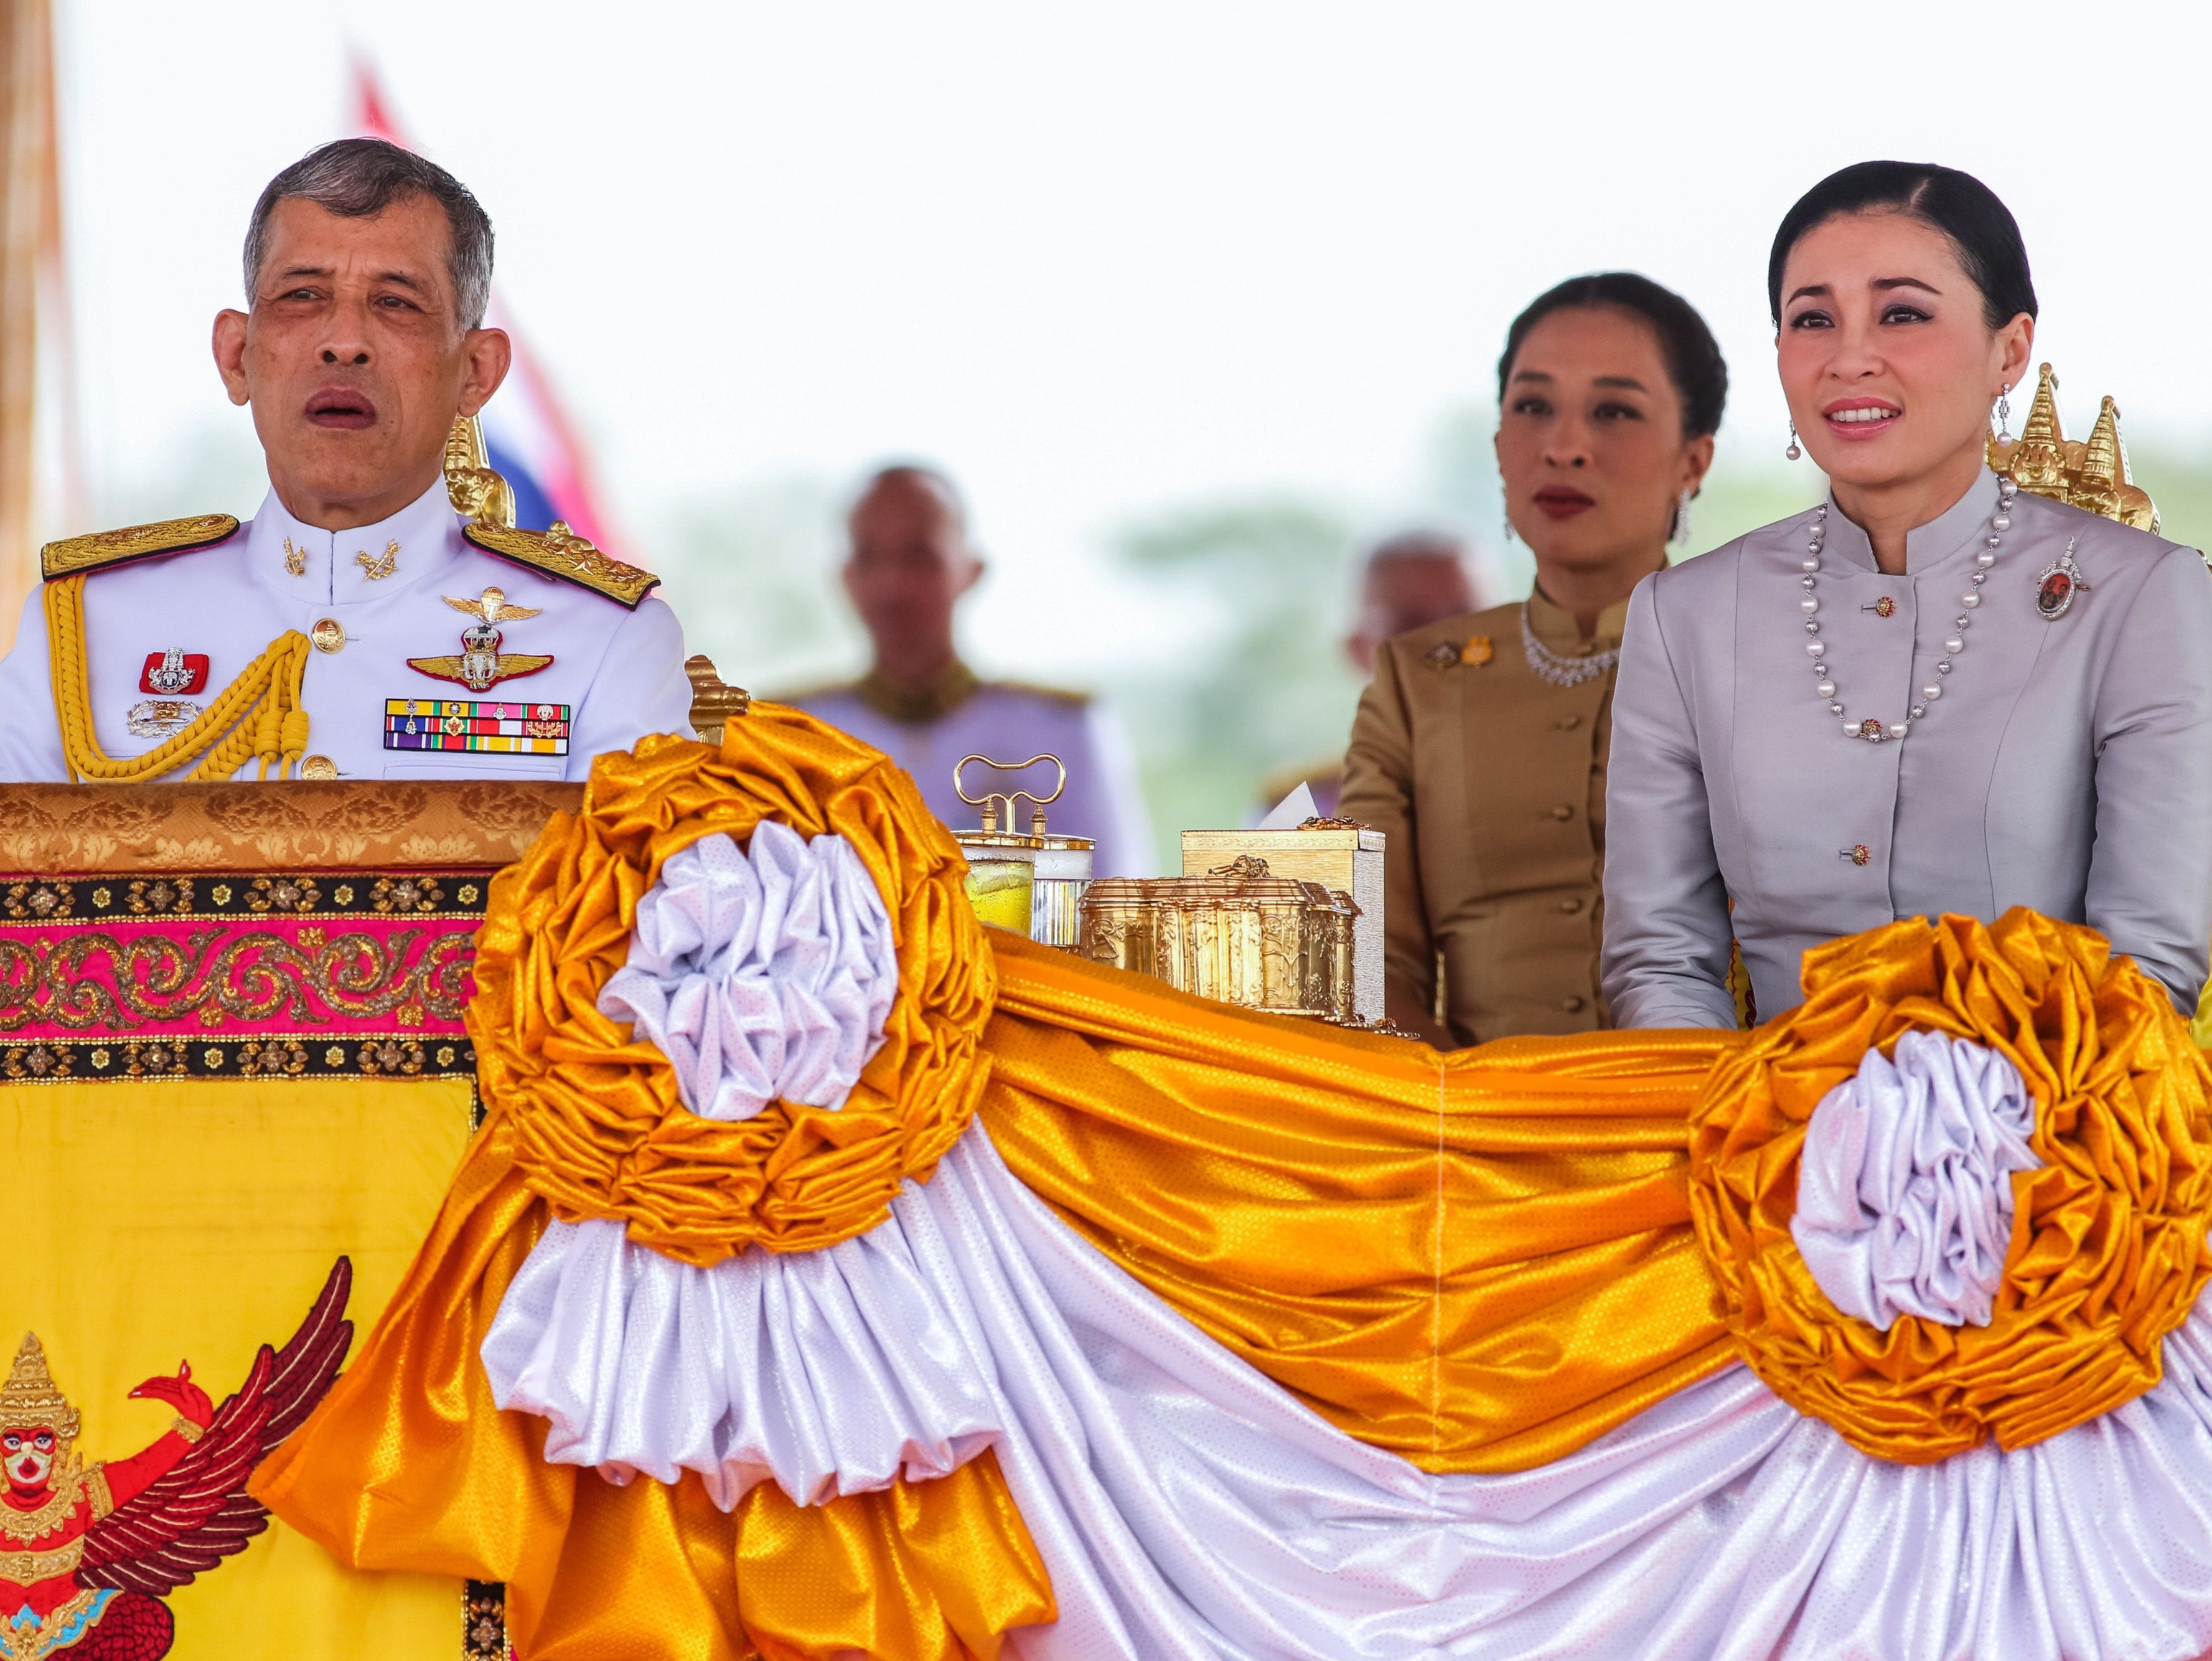 Thailand’s King Maha Vajiralongkorn (left) is accompanied by Queen Suthida (right) and Princess Bajrakitiyabha Mahidol (centre) as he presides over the annual royal ploughing ceremony near the Grand Palace in Bangkok in May 2019